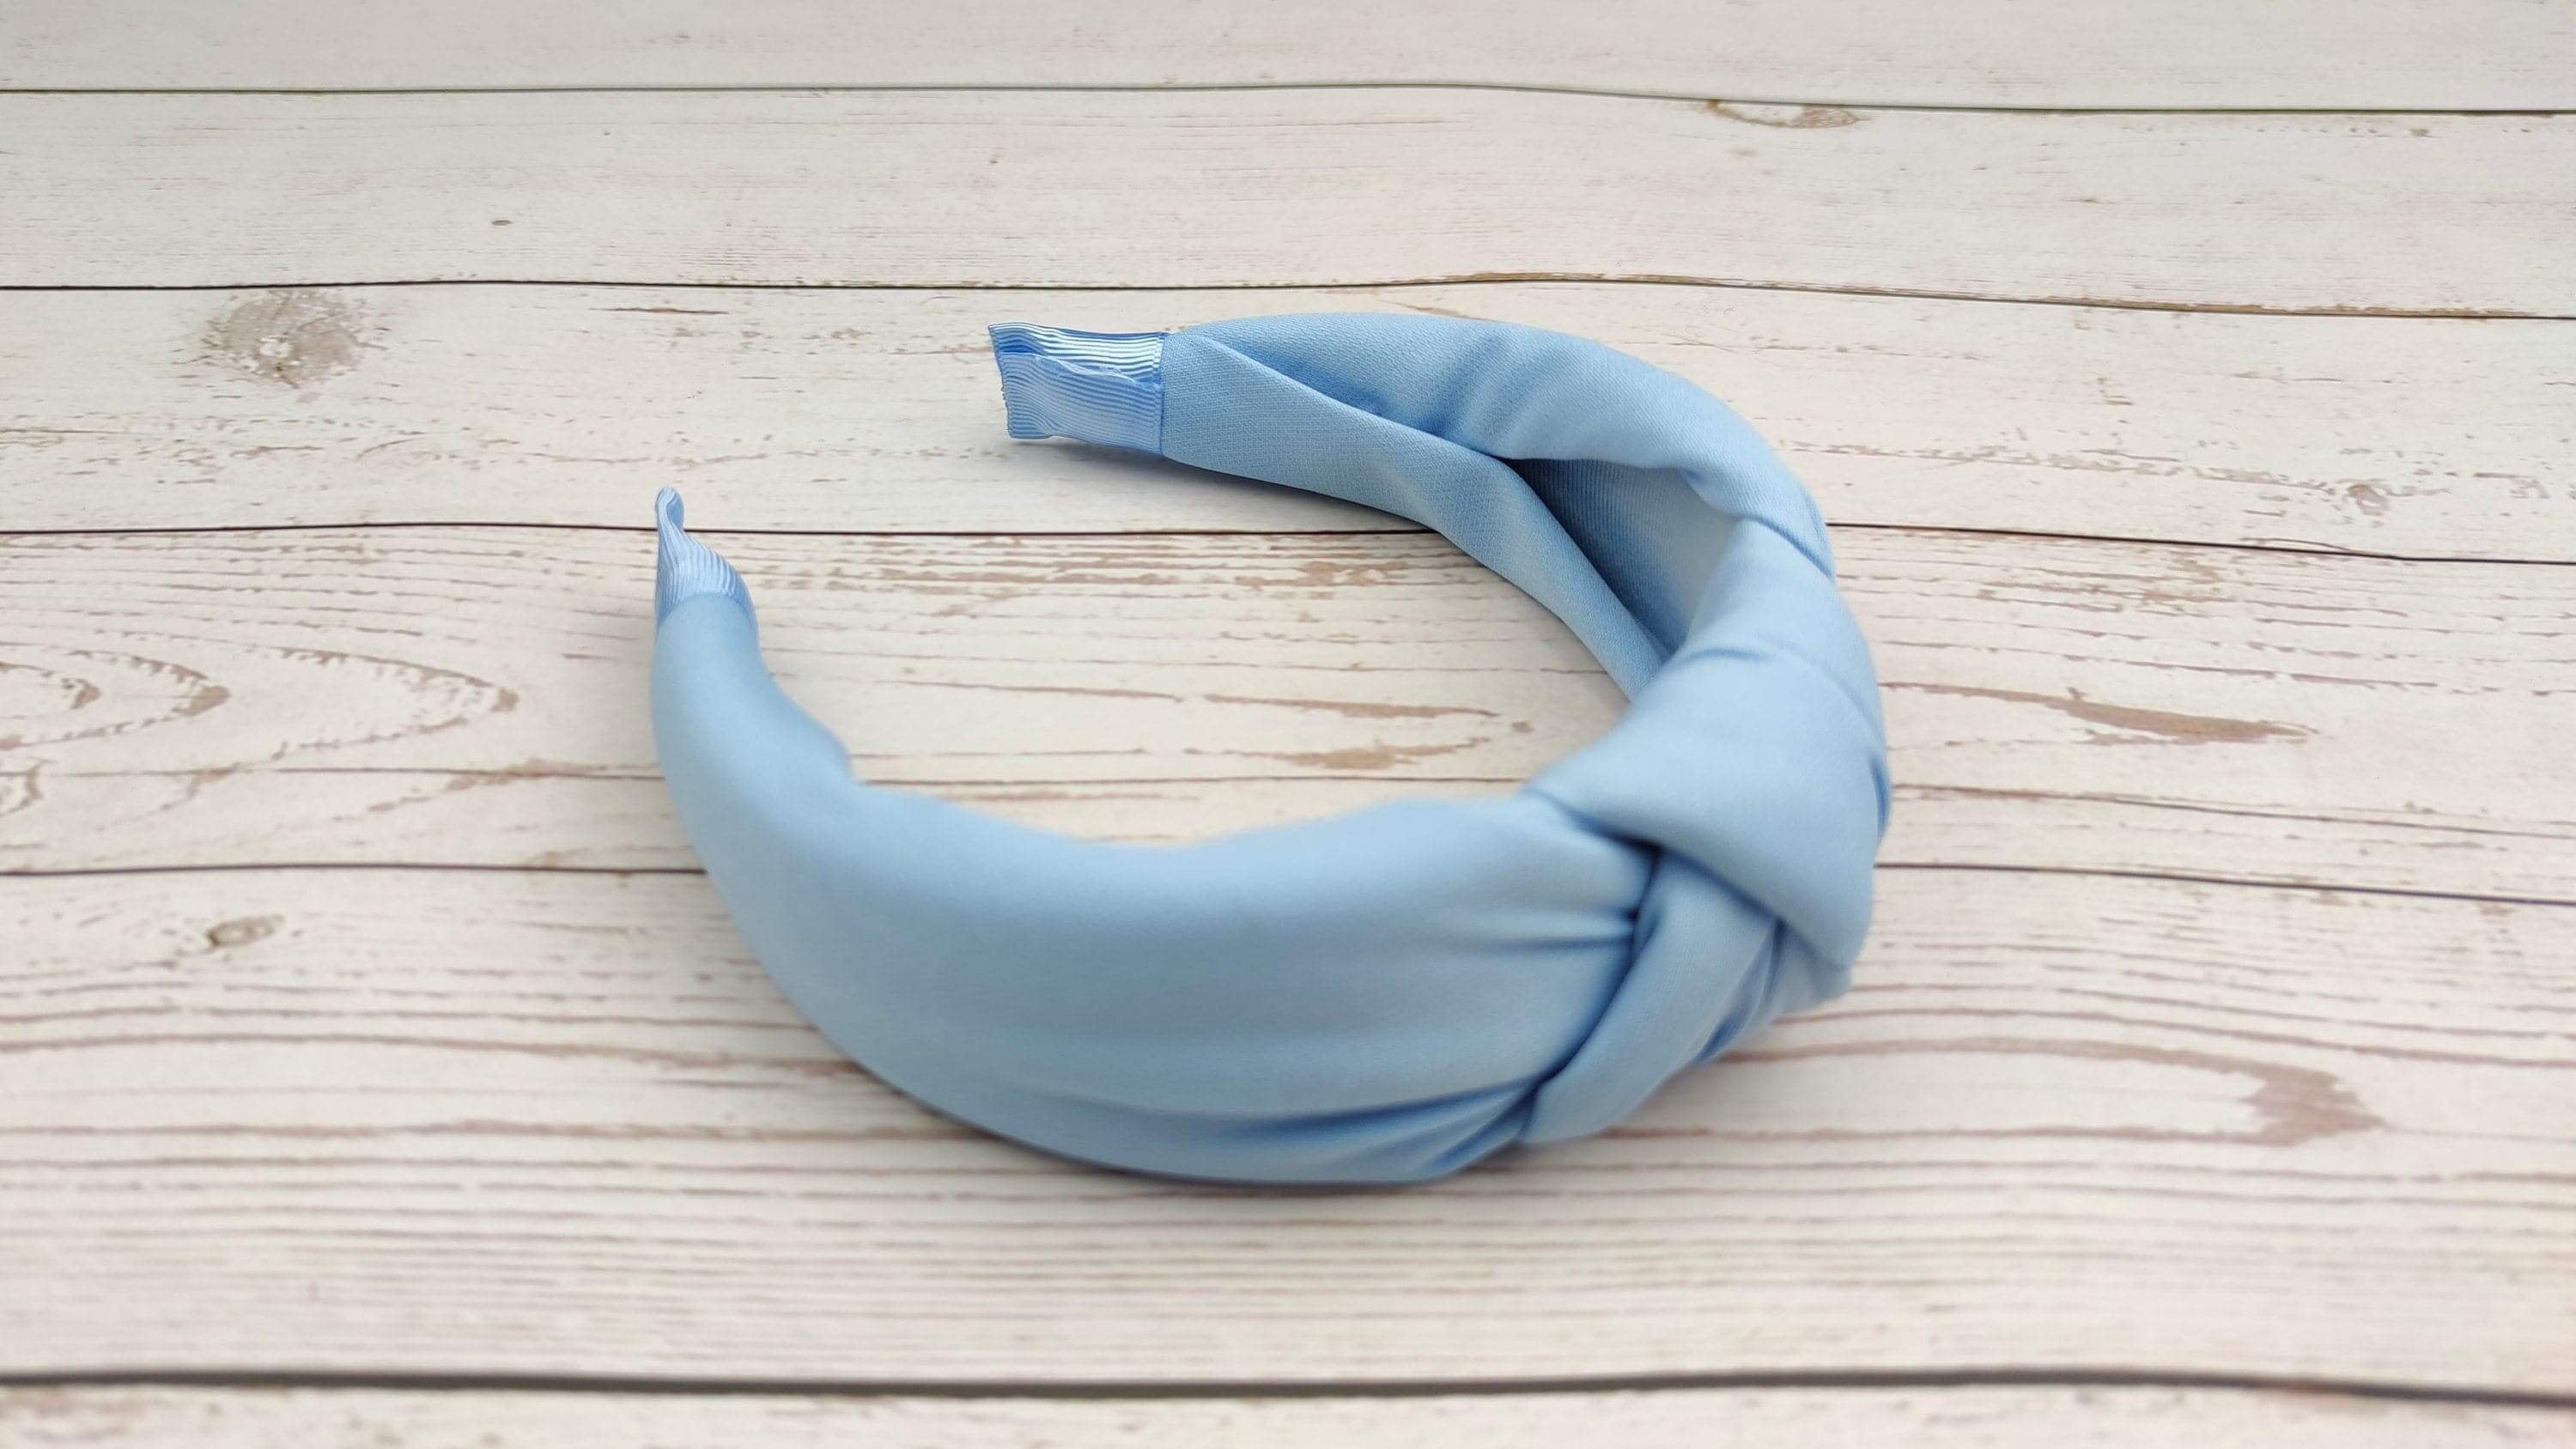 The perfect accessory for any hairstyle: a chic twist knot headband in bright light blue.